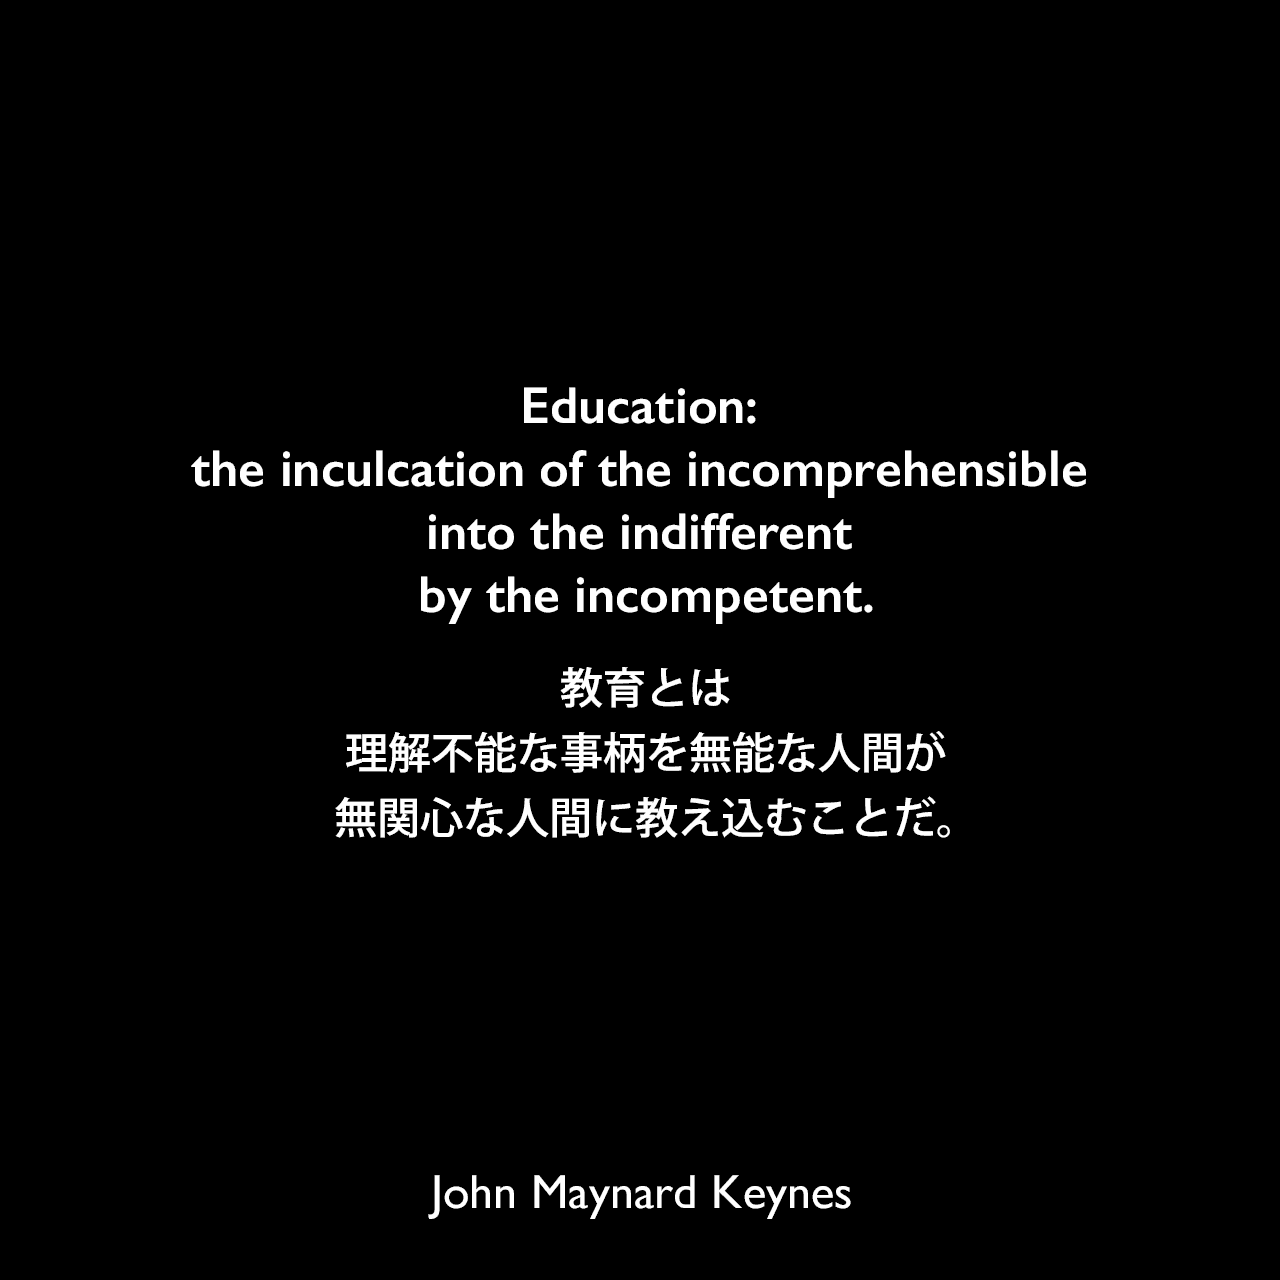 Education: the inculcation of the incomprehensible into the indifferent by the incompetent.教育とは、理解不能な事柄を無能な人間が無関心な人間に教え込むことだ。（Jewish Frontier誌でインタビュアーの記憶として紹介）John Maynard Keynes